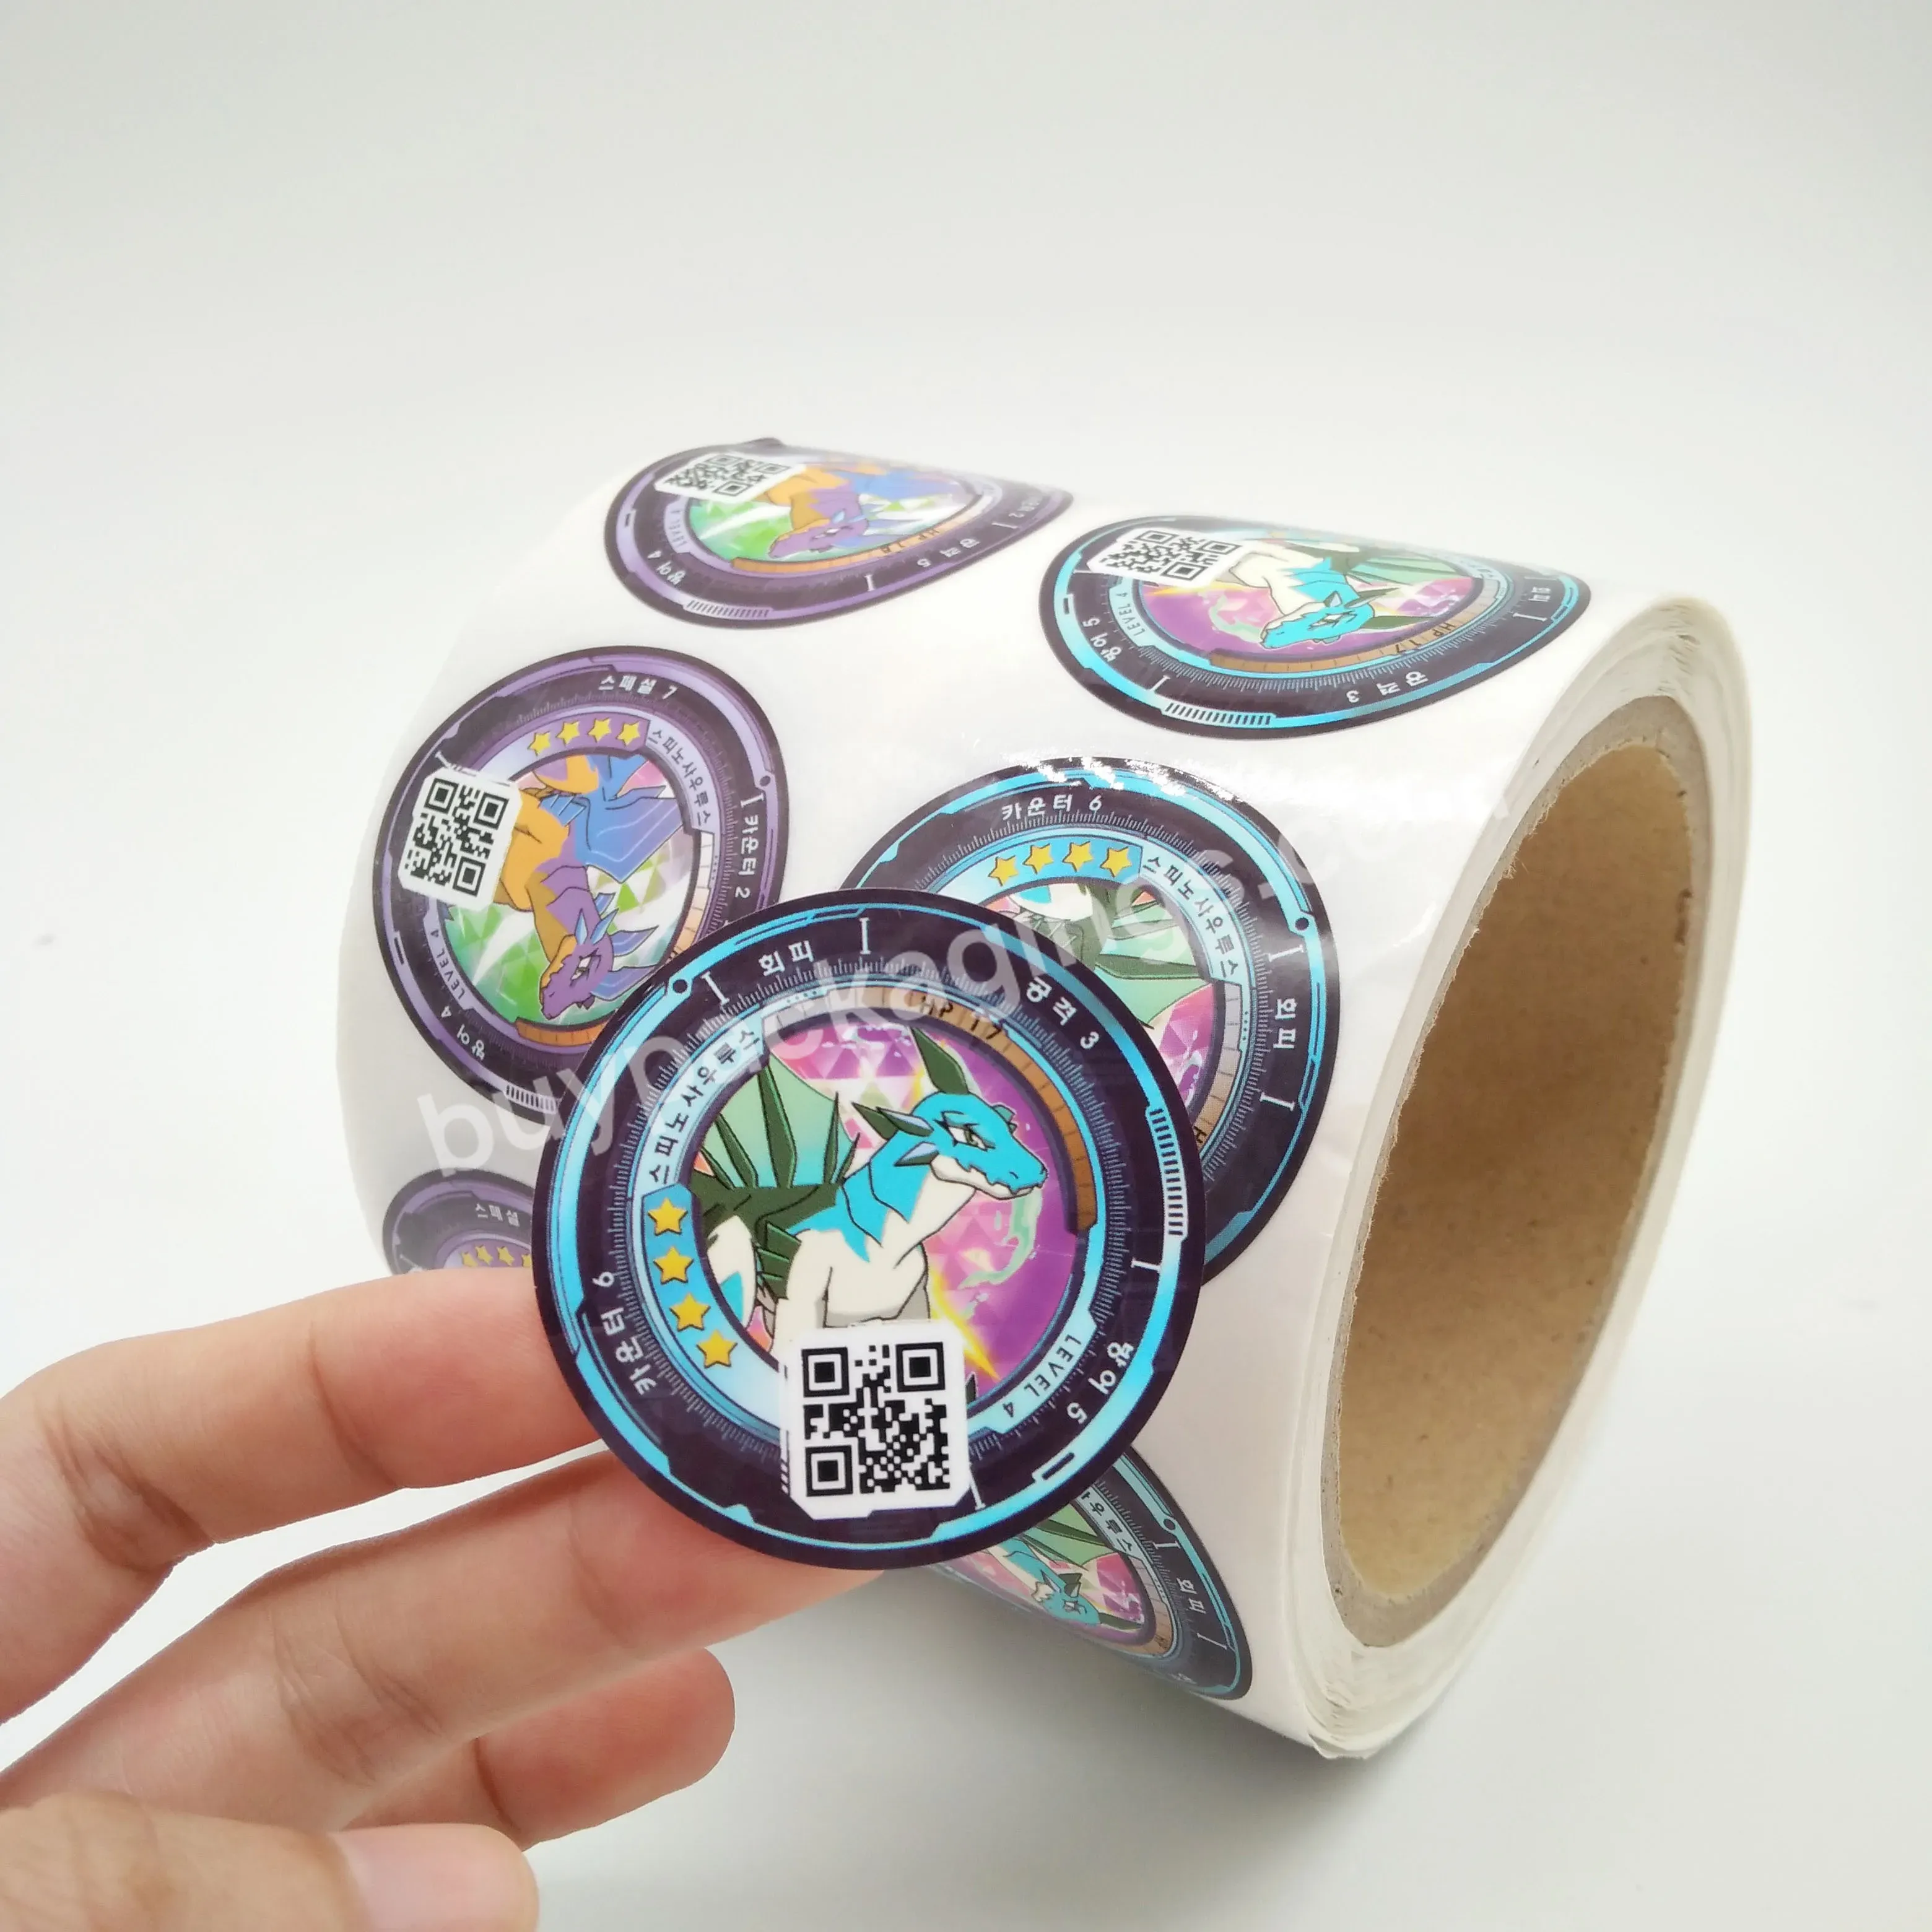 Qr Code And Serial Number Printing Adhesive Hologram Foiled Stickers Label